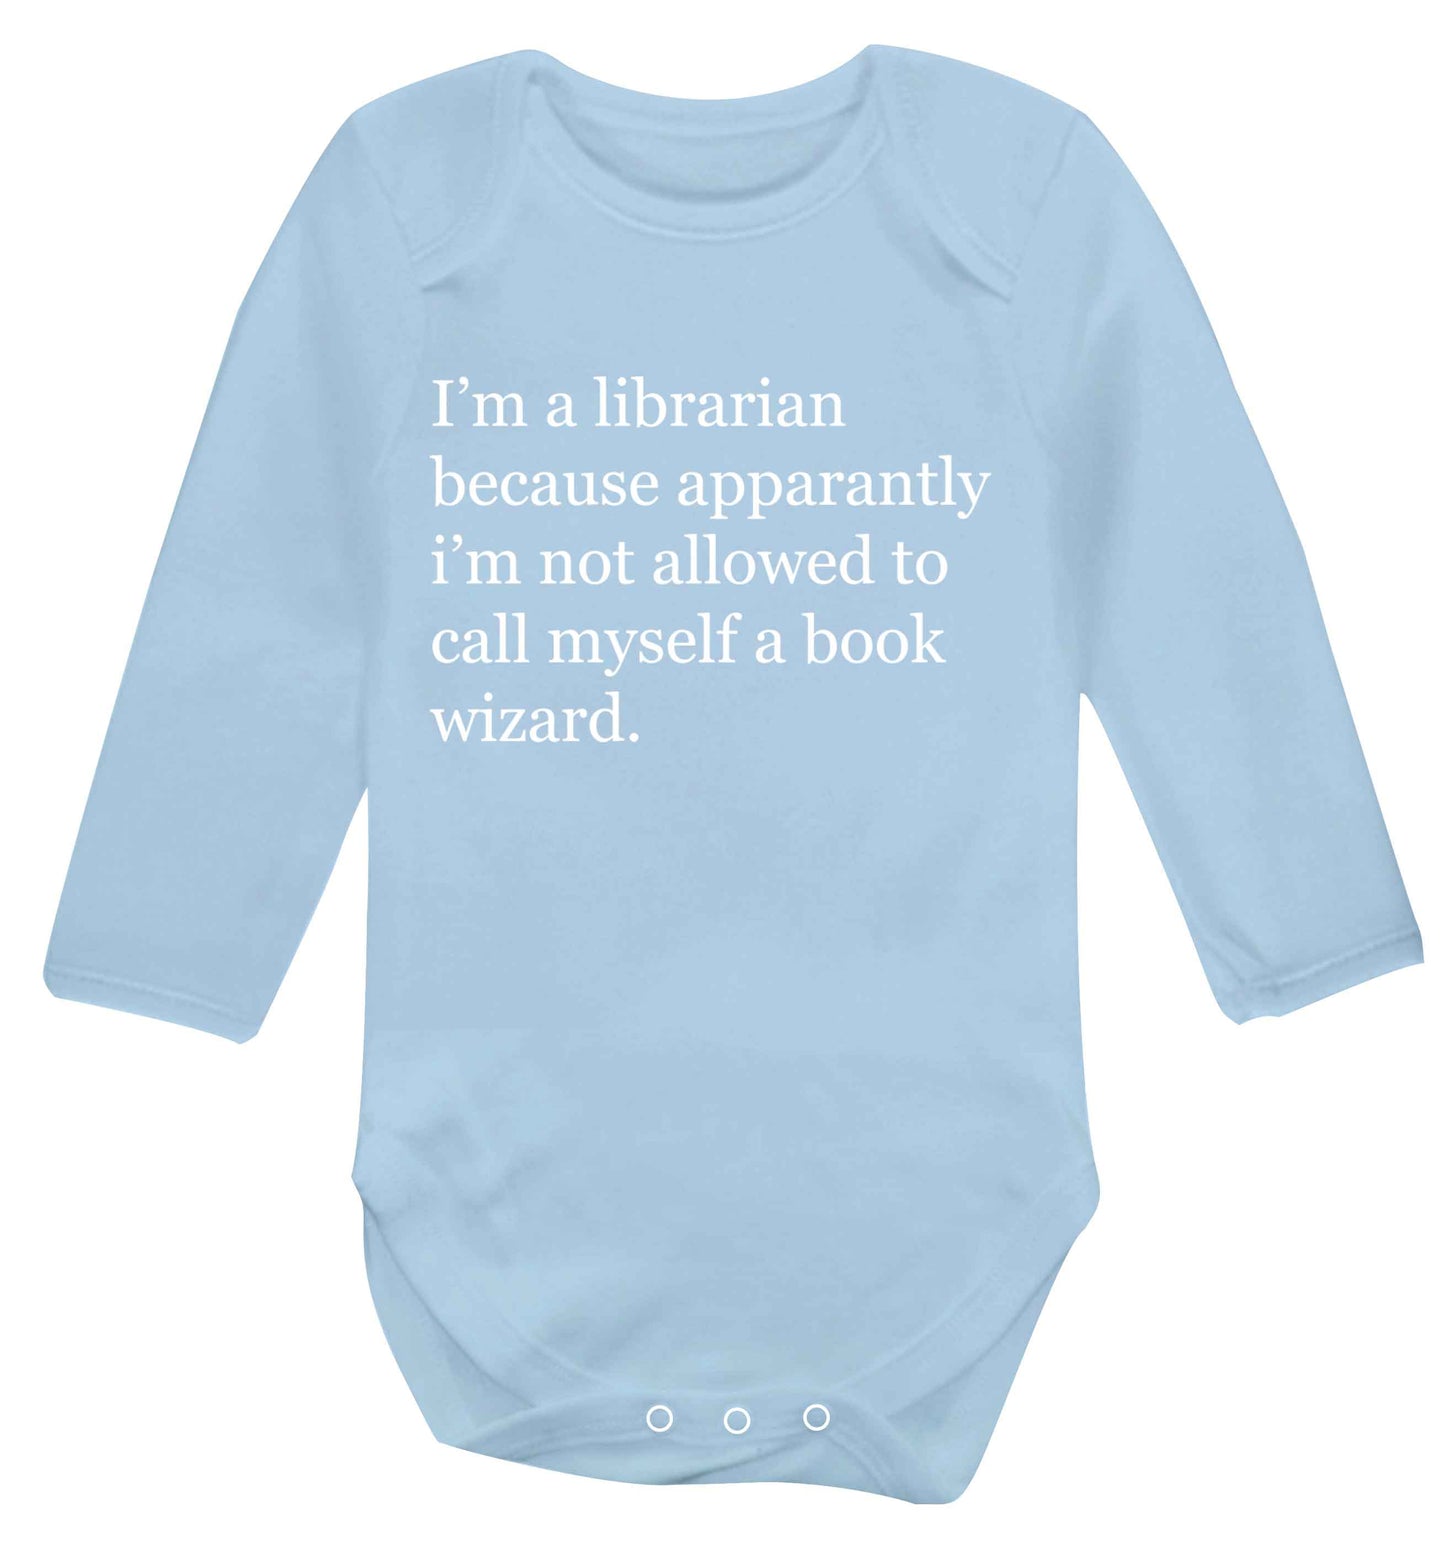 i√ïm a librarian because apparantly i√ïm not allowed to call myself a book wizard Baby Vest long sleeved pale blue 6-12 months